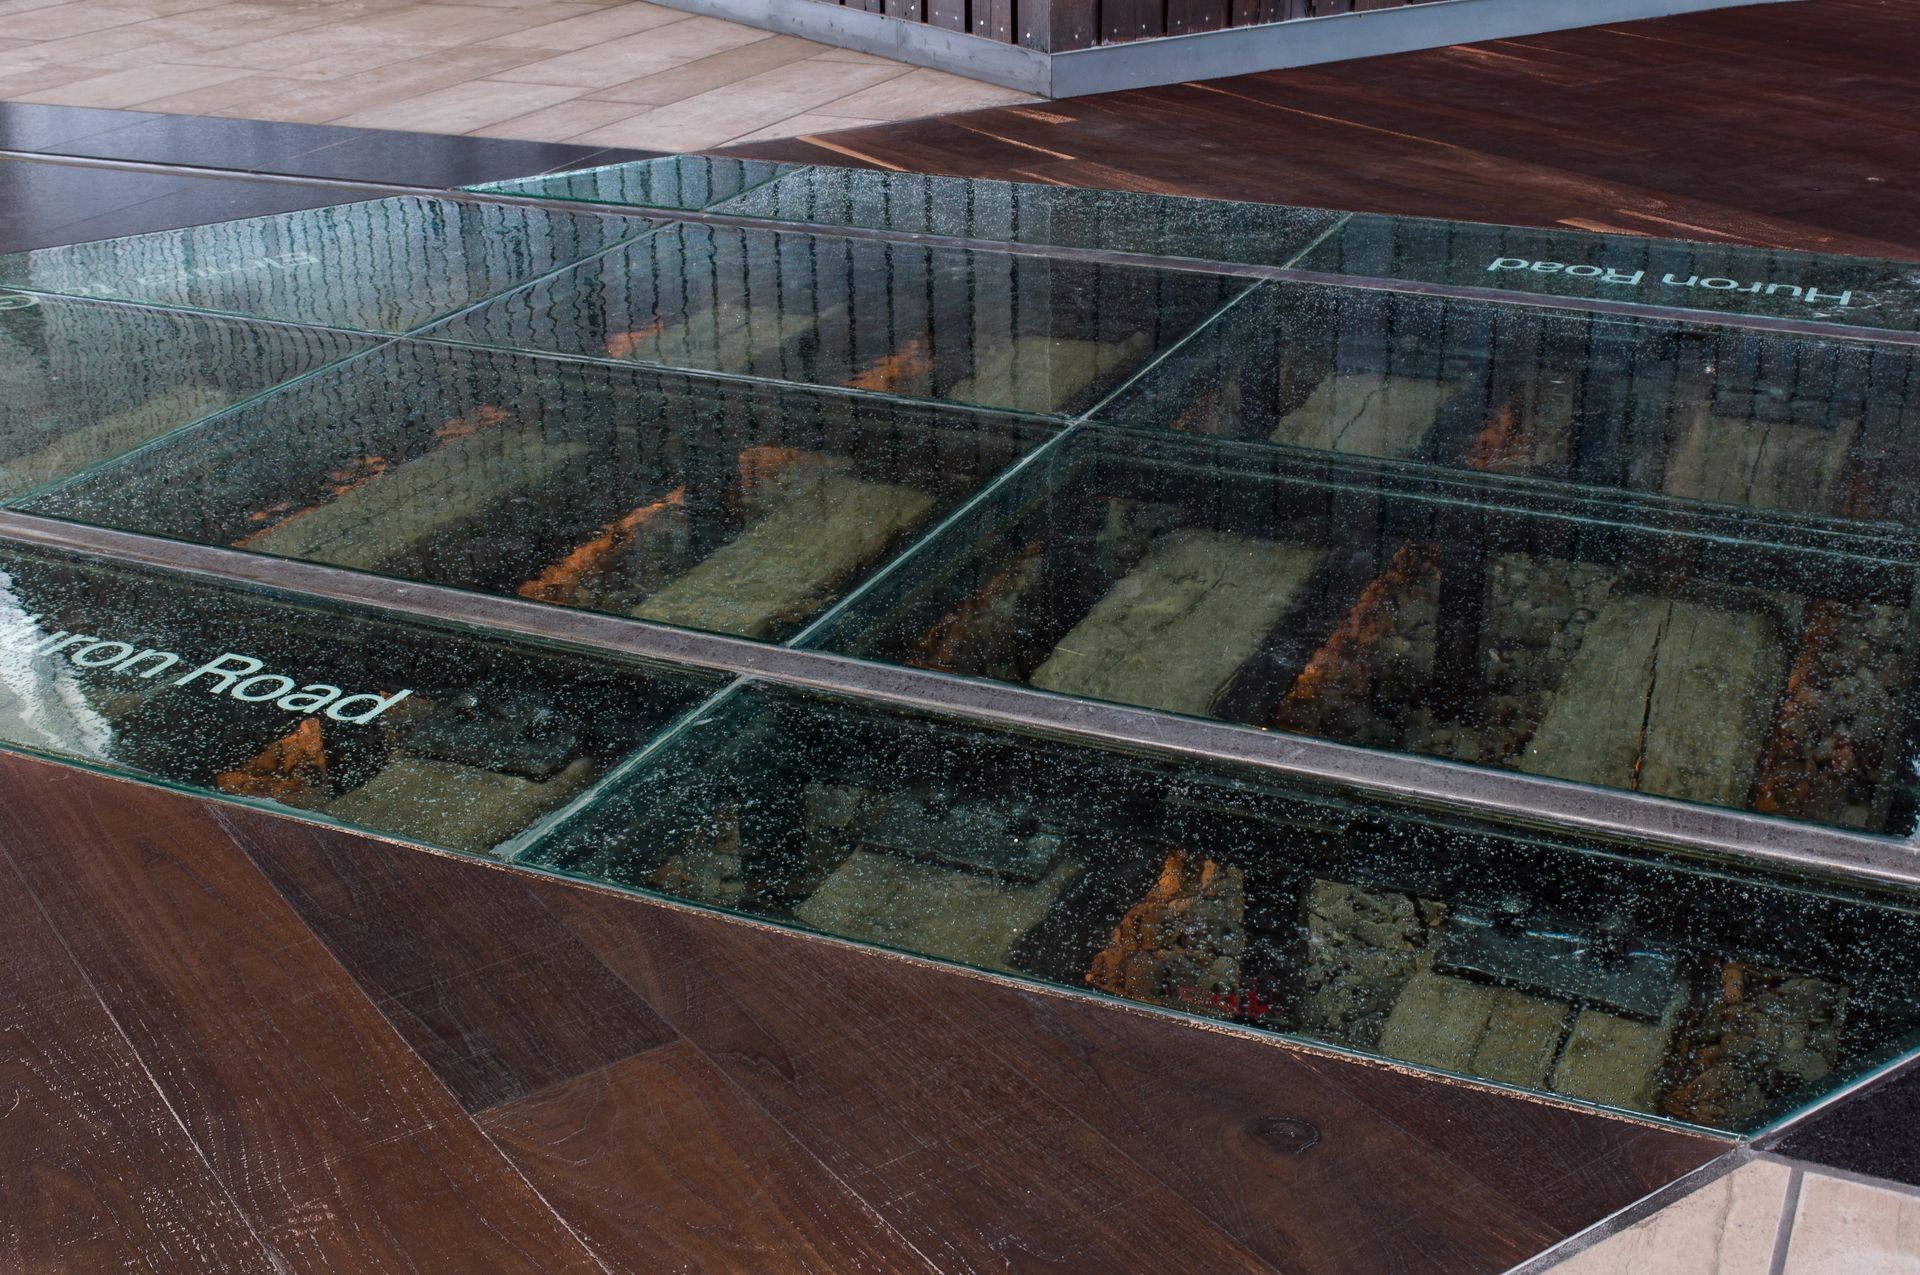 See-through glass flooring in a museum.